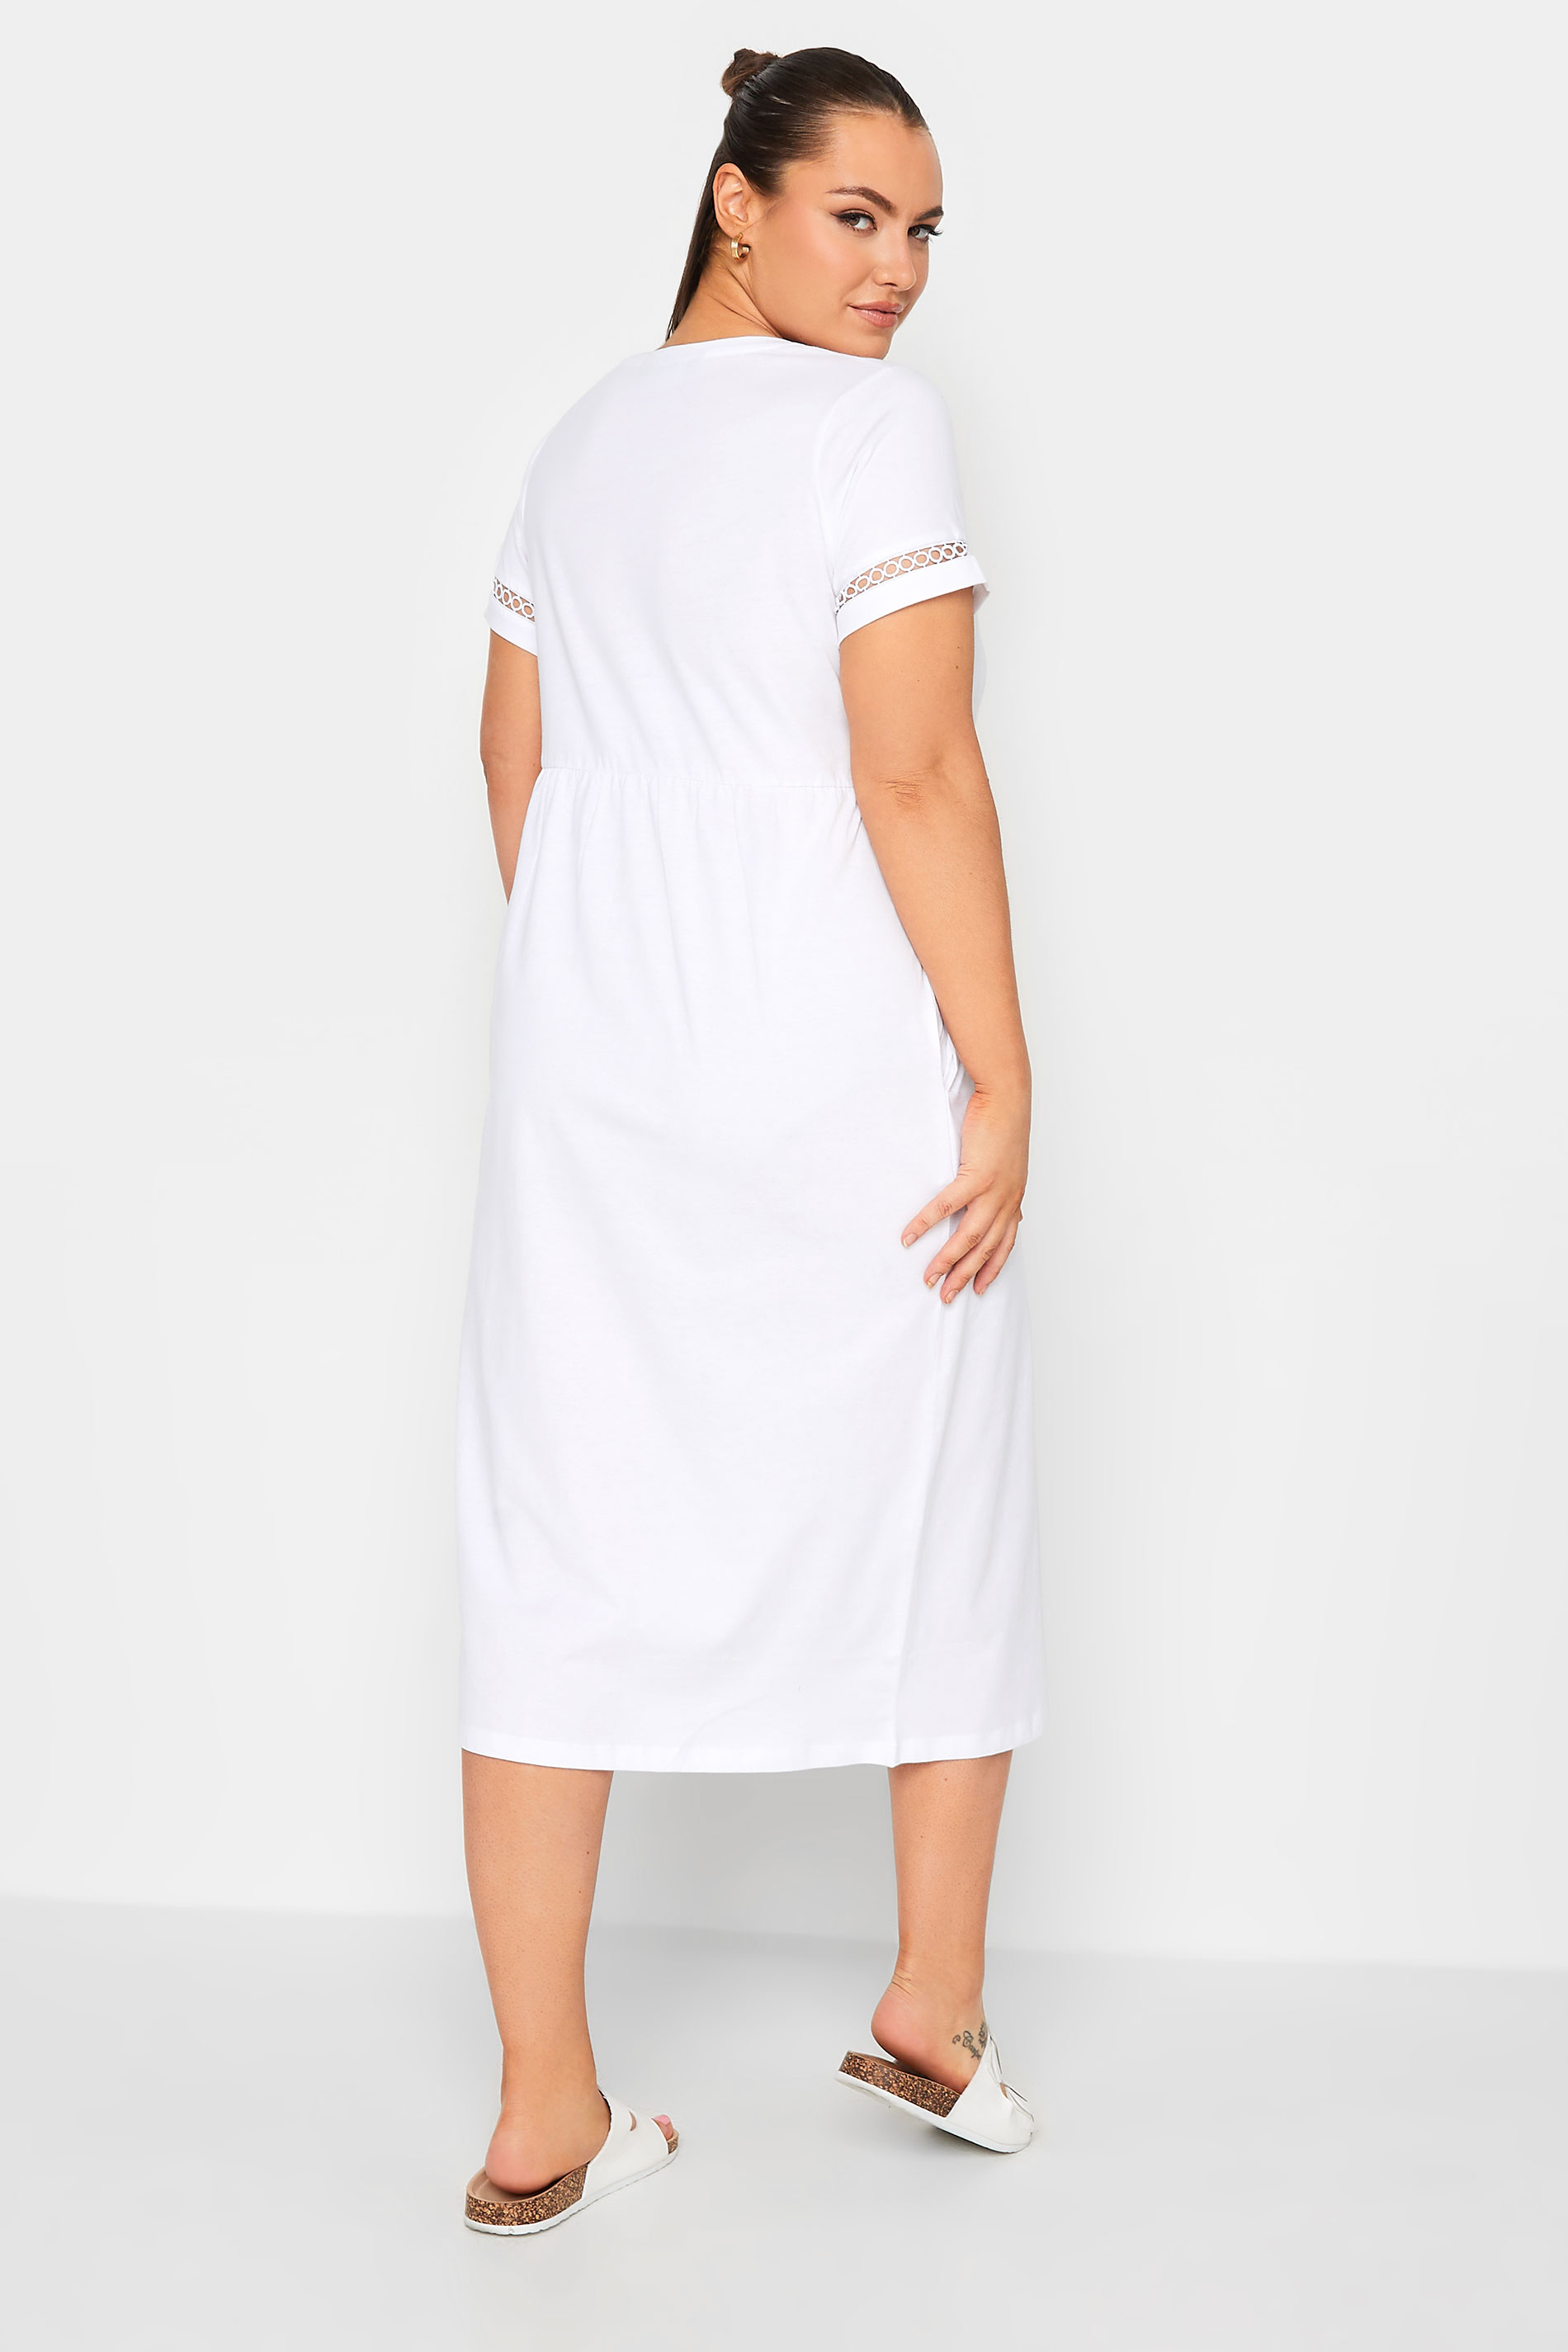 LIMITED COLLECTION Plus Size Curve White Crochet T-Shirt Dress | Yours Clothing  3